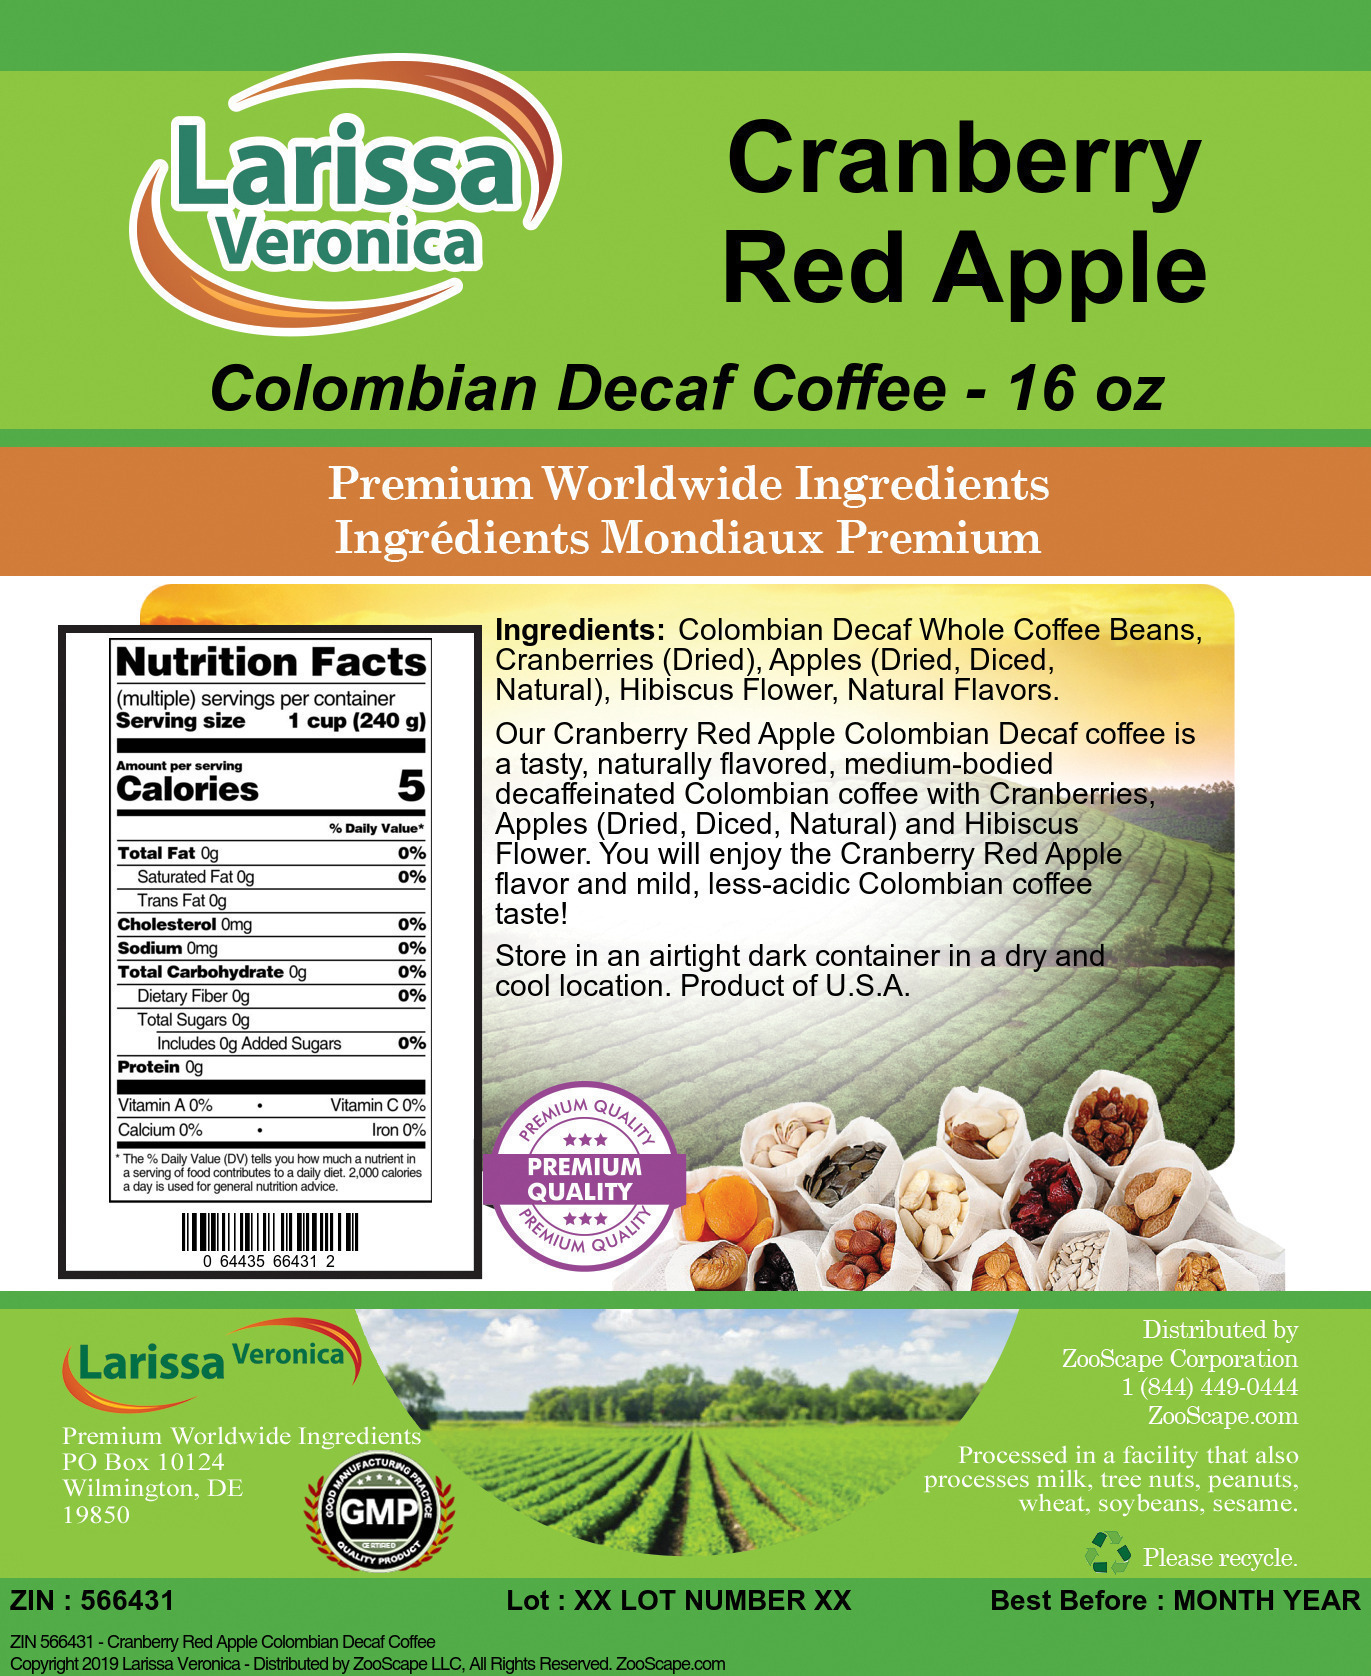 Cranberry Red Apple Colombian Decaf Coffee - Label